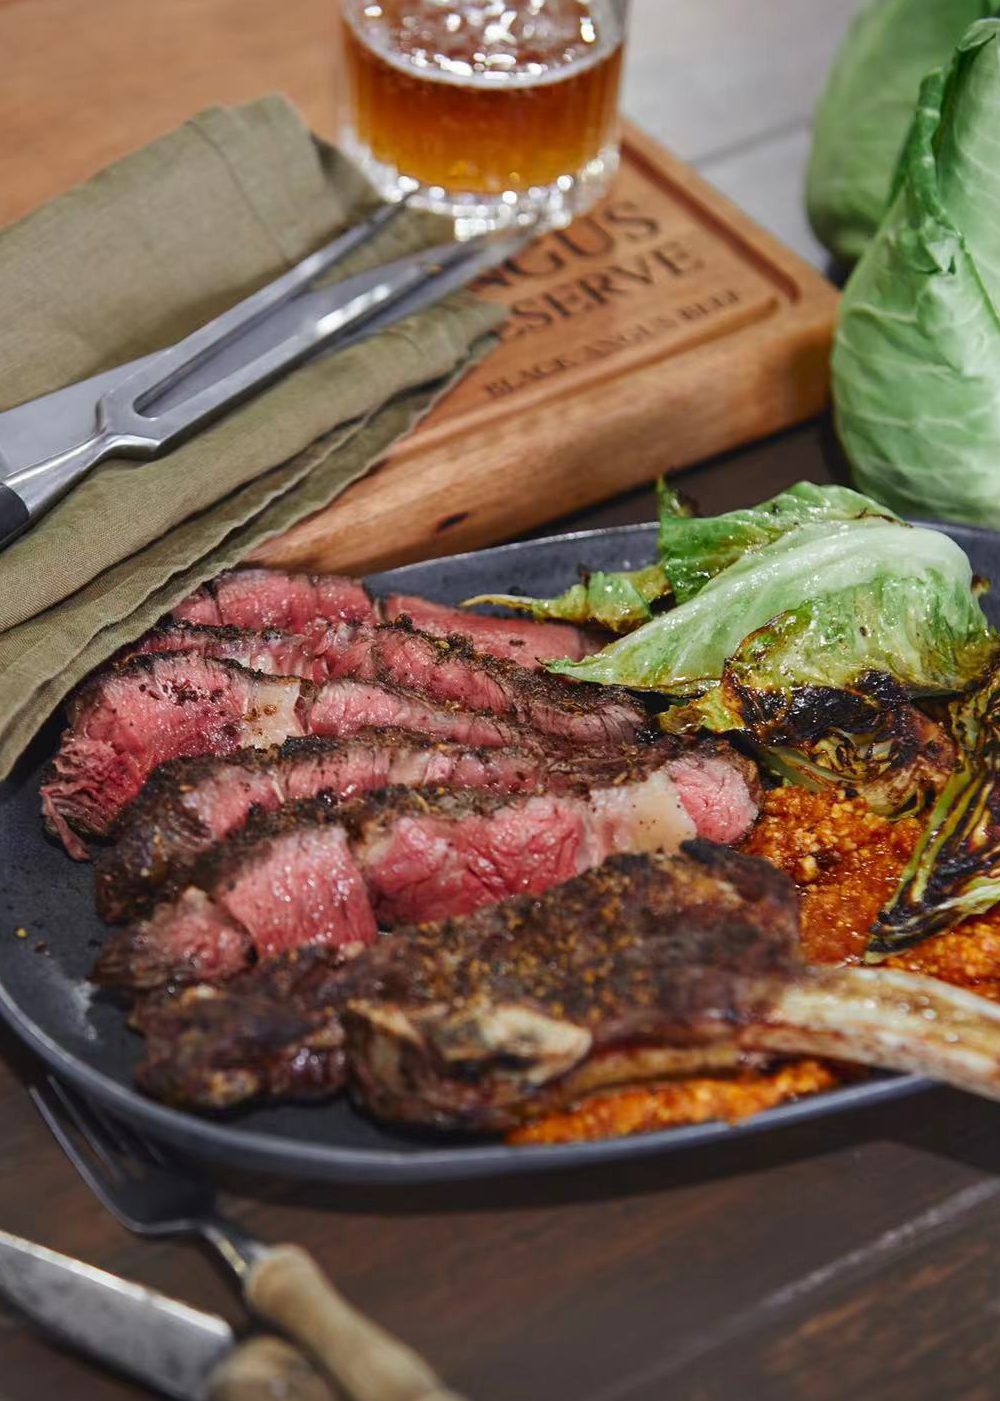 Fennel And Sumac-Crusted Rib-Eye With Romesco And Grilled Baby Cabbage